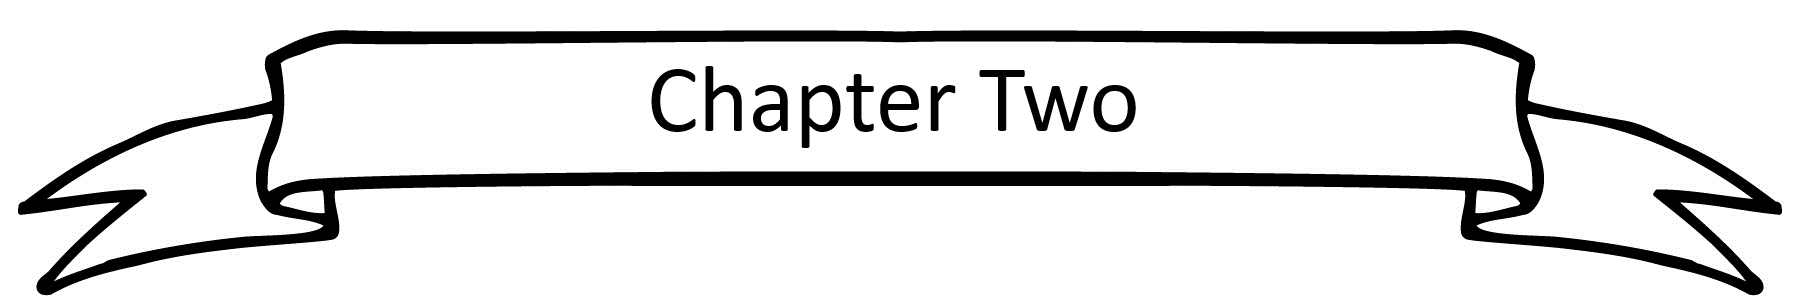 chapter two heading